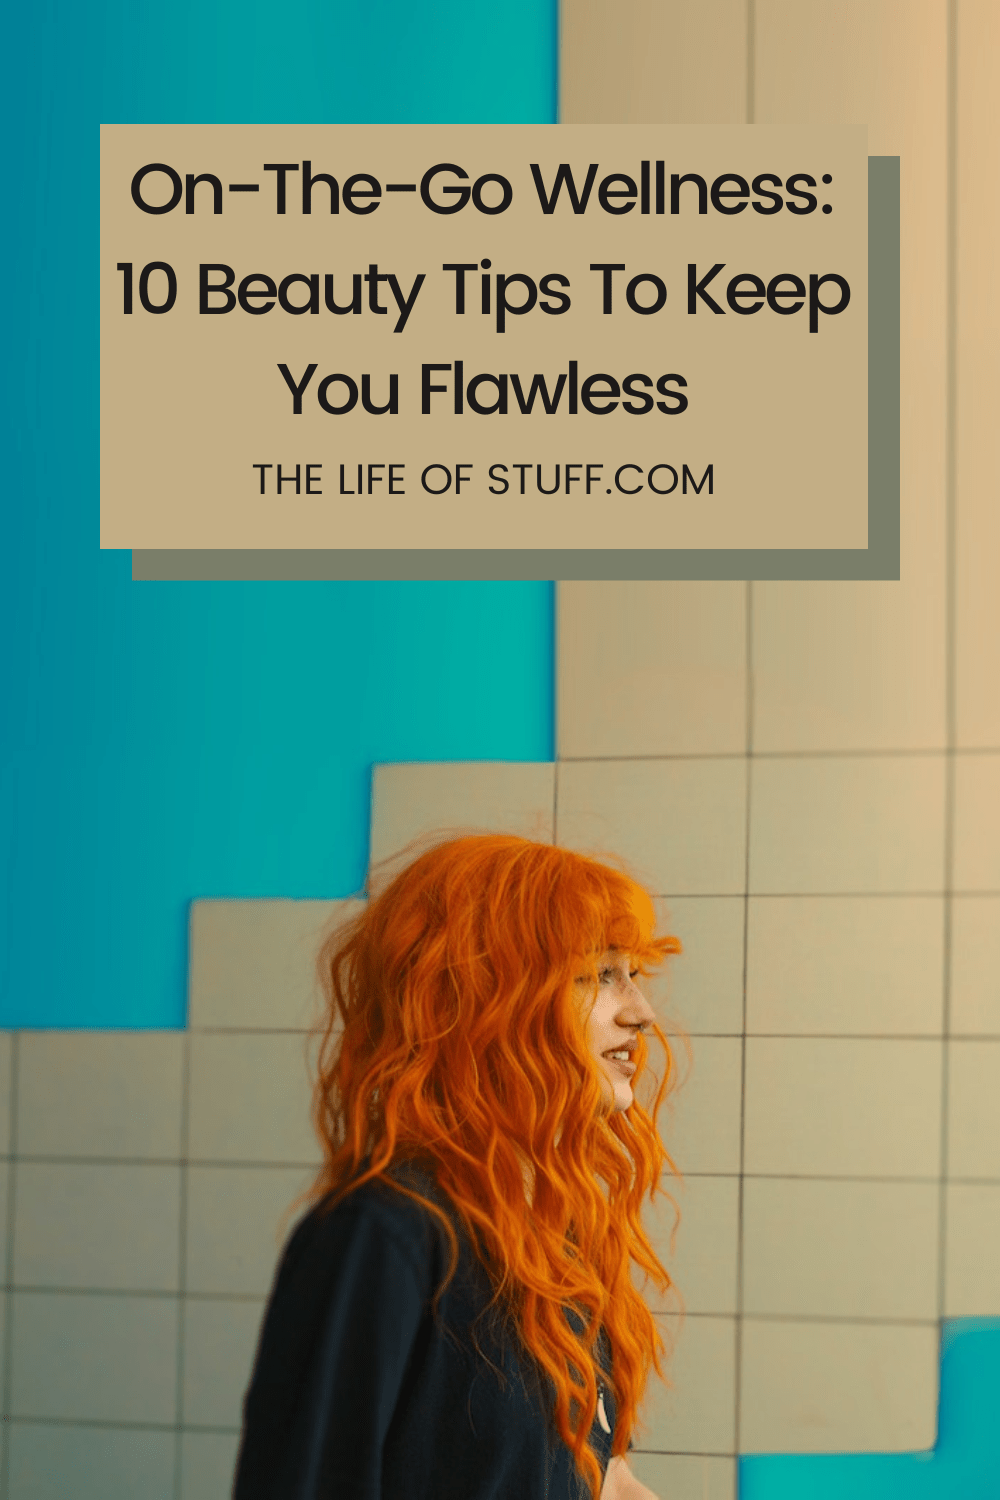 On-The-Go Wellness - 10 Beauty Tips To Keep You Flawless on The Life of Stuff